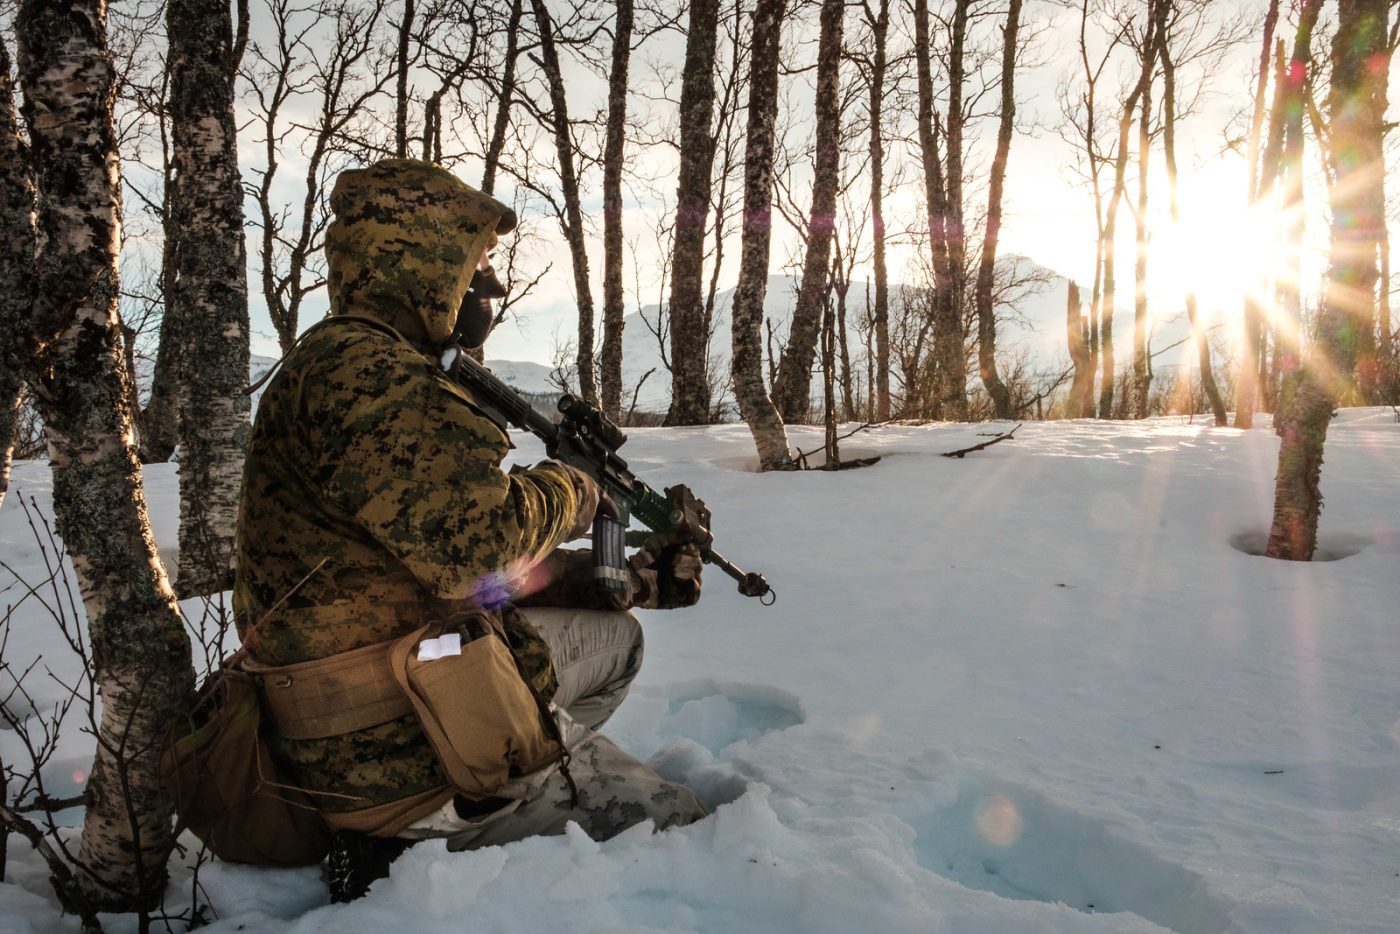 Photo: A US Marine stands sentry near Moen, Norway as part of Exercise White Claymore in February 2018. During the exercise, Marines with Marine Rotational Force-Europe honed their winter warfare skills with UK Royal Marines with 45 Commando. Credit: NATO Flickr